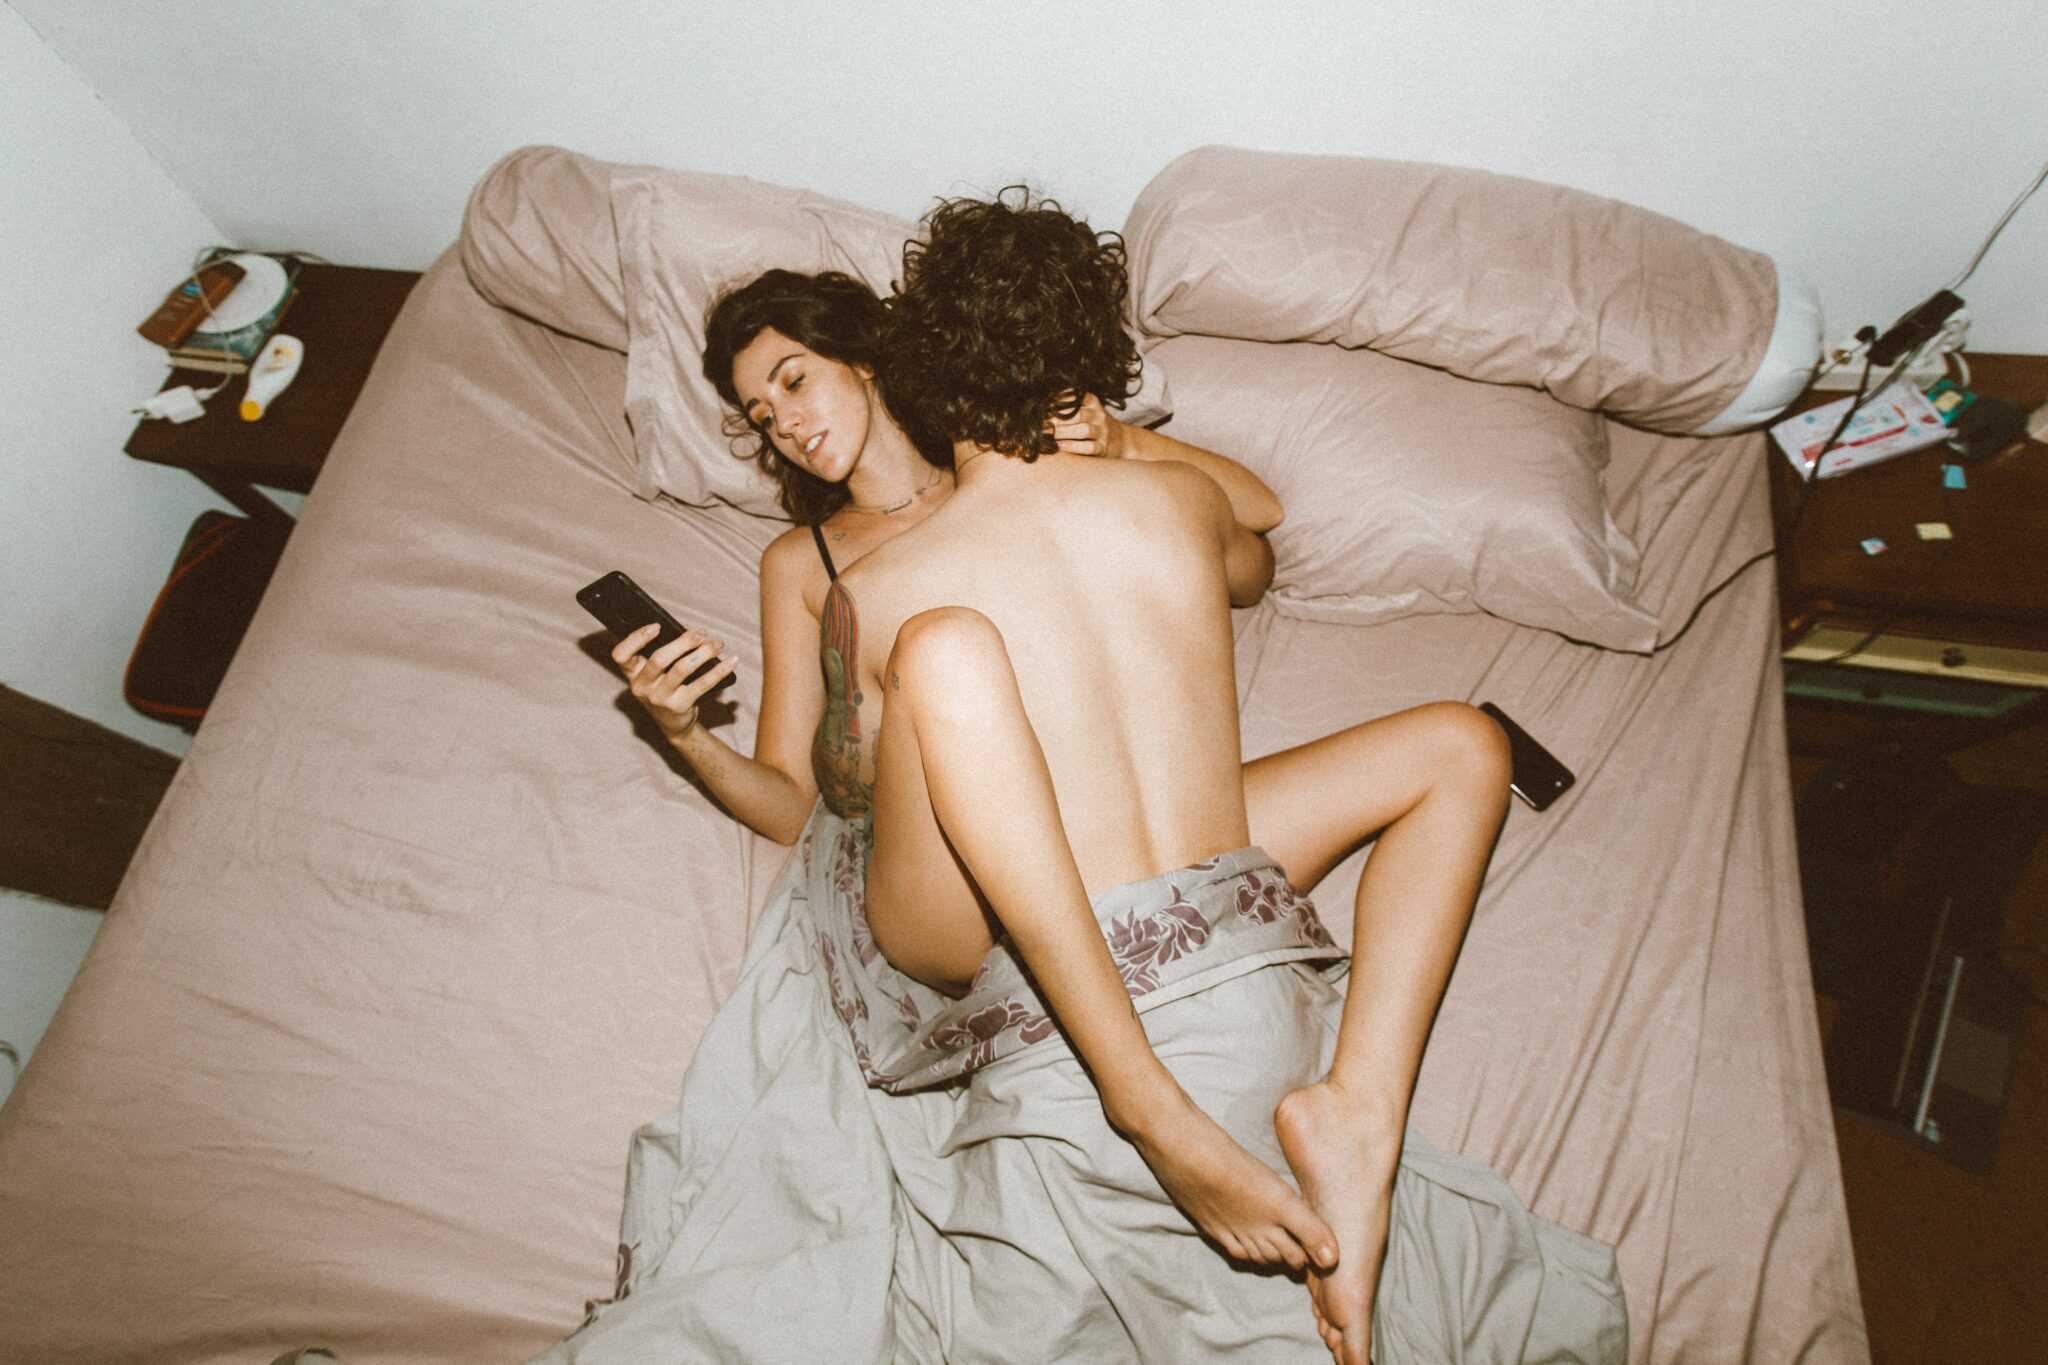 A couple having sex in their bed while the woman looks at her phone.